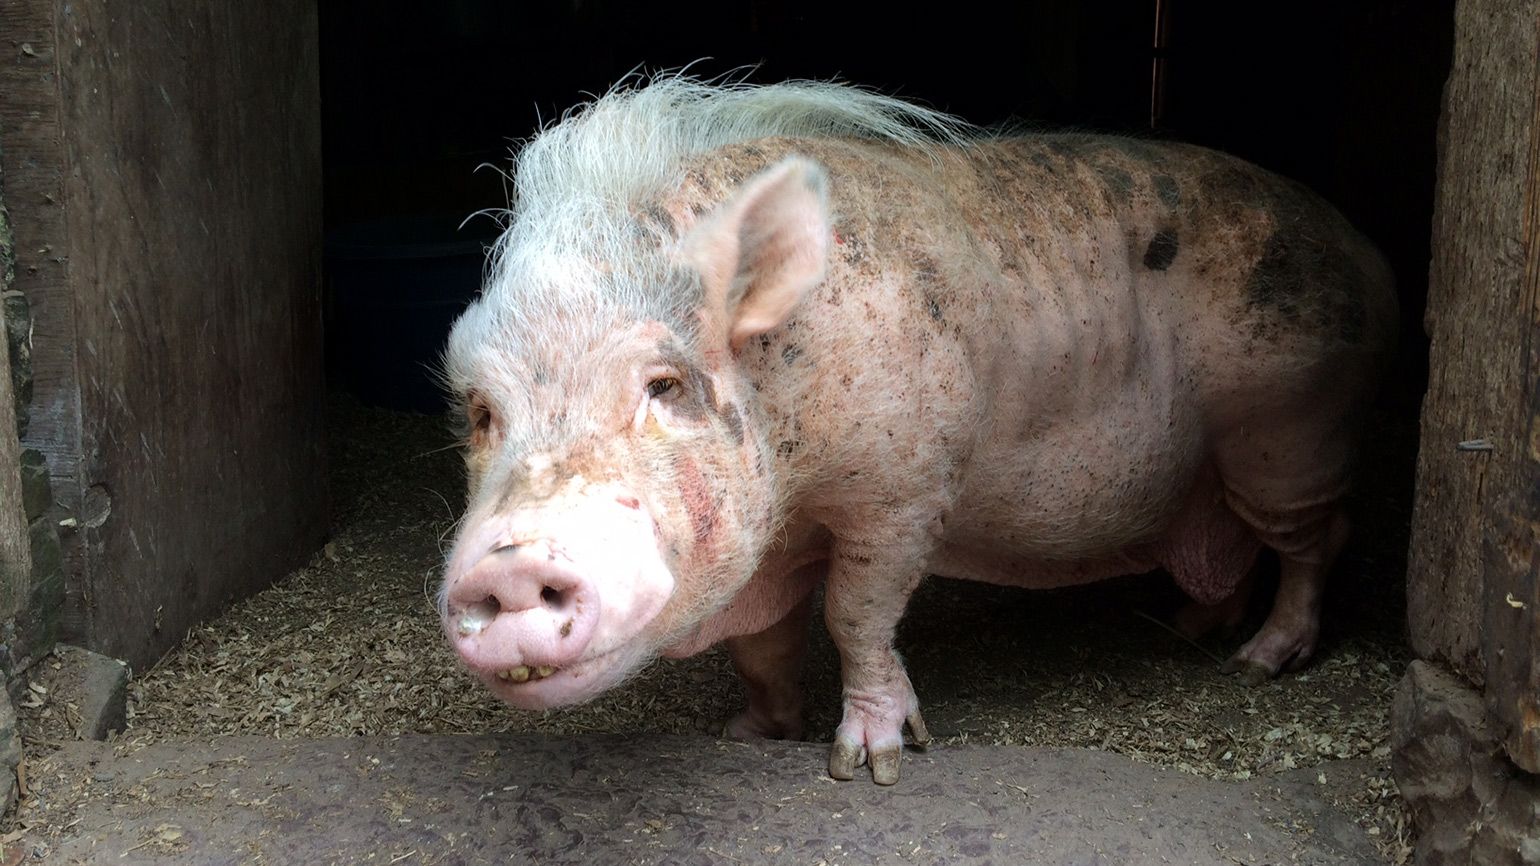 This pig is one of the farm's elders.